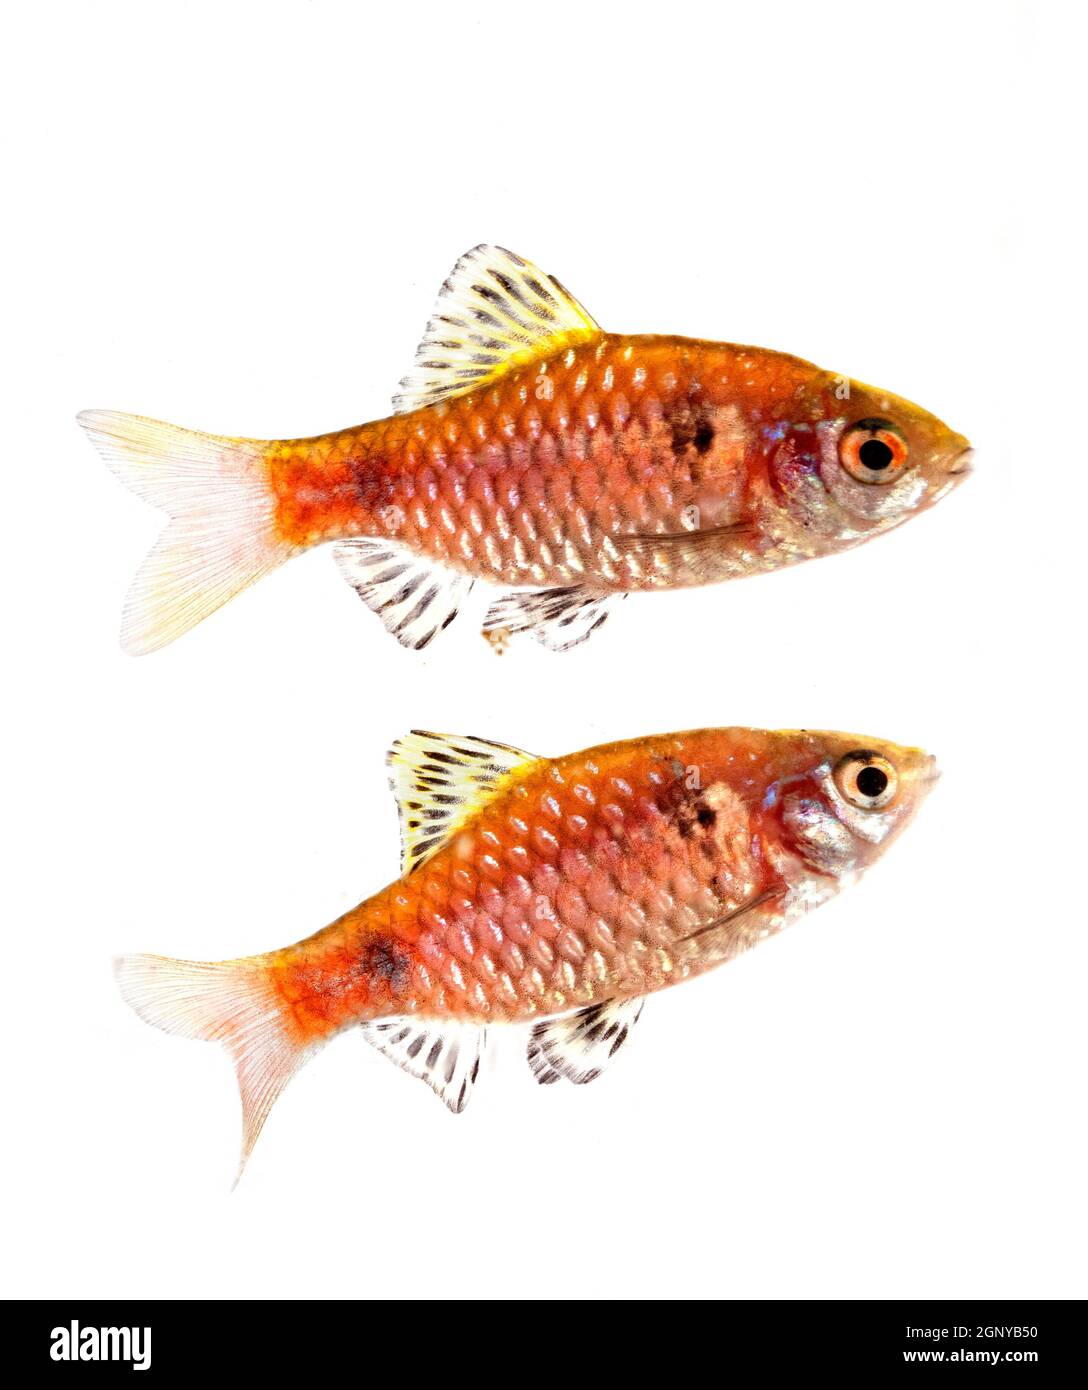 Odessa barb in front of white background Stock Photo